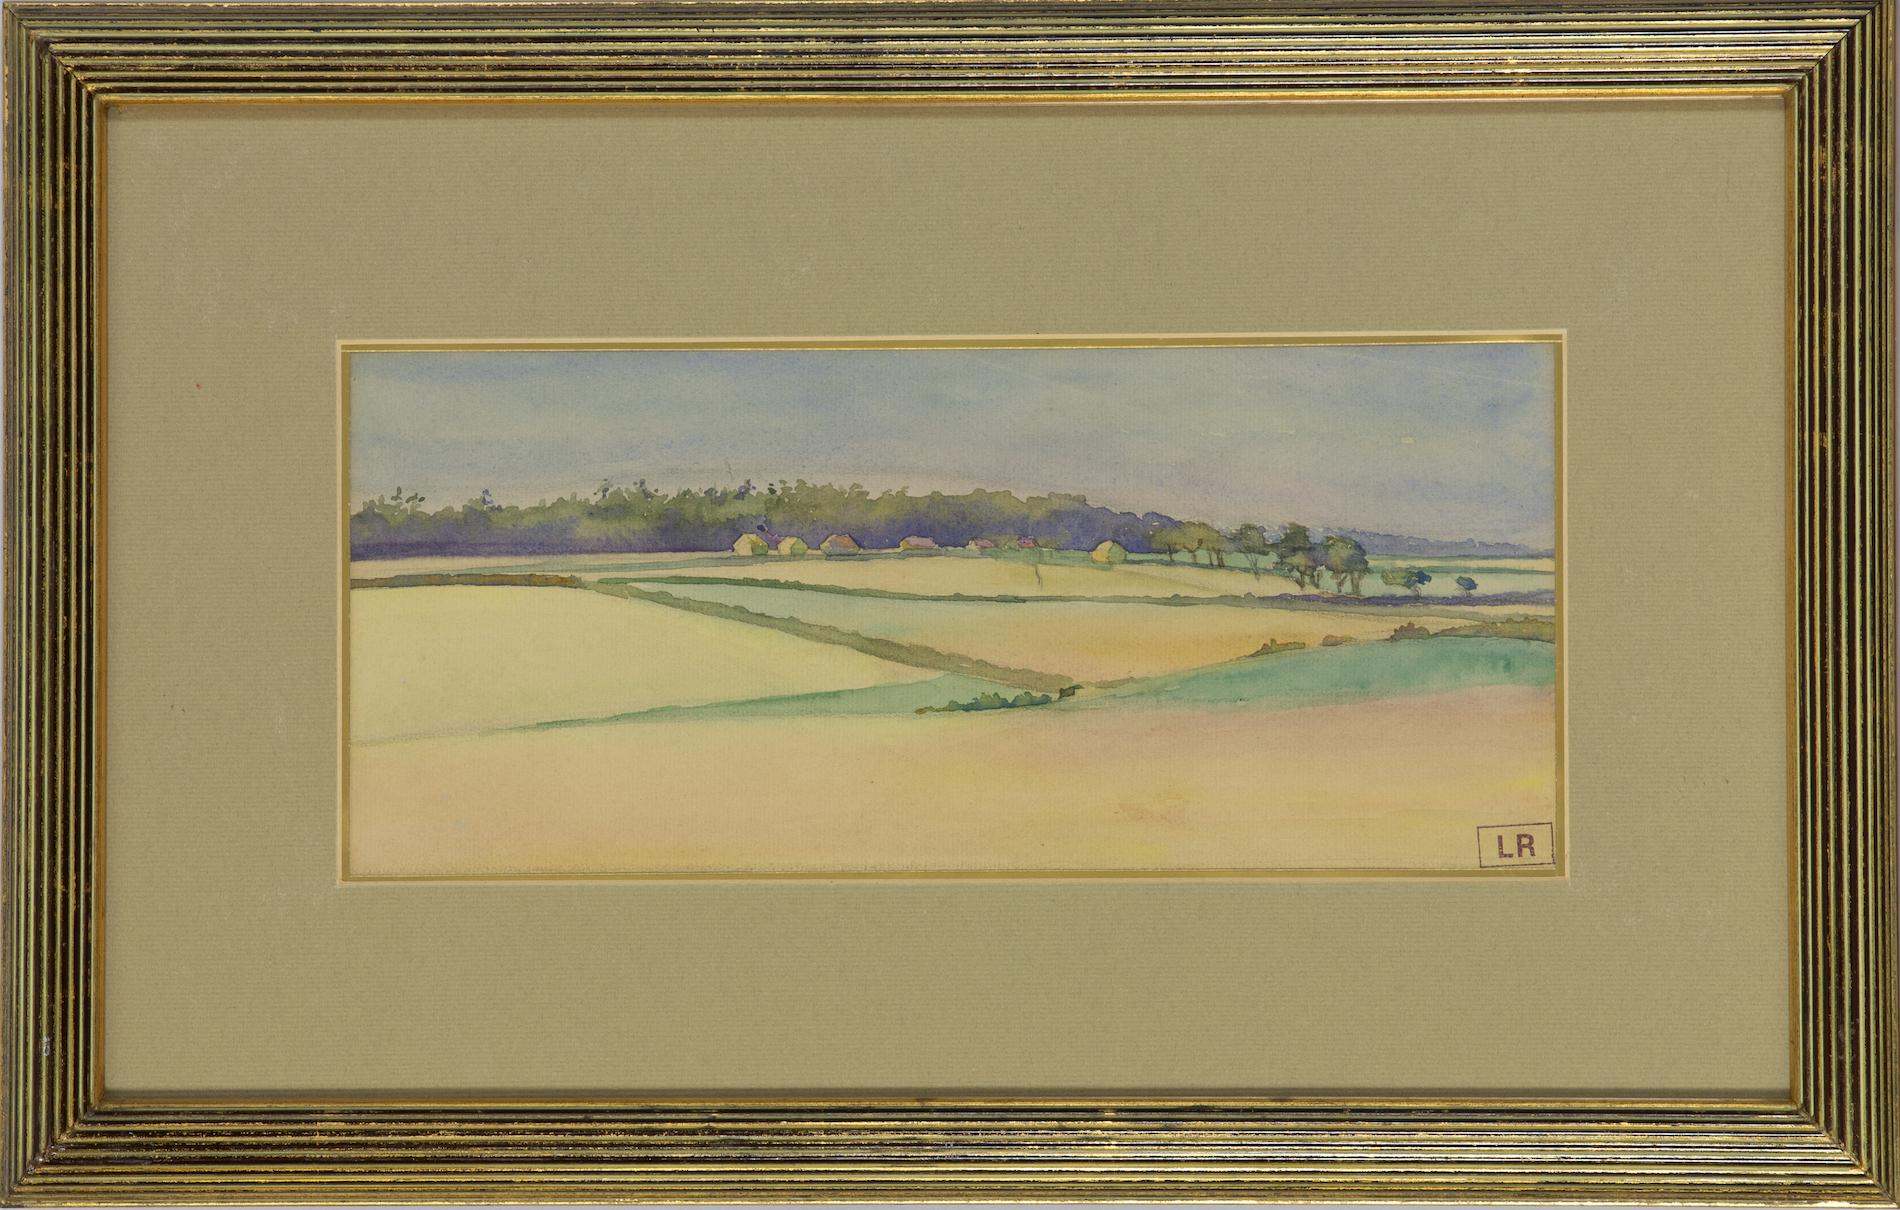 *UK BUYERS WILL PAY AN ADDITIONAL 20% VAT ON TOP OF THE ABOVE PRICE

Landscape with Haystacks by Ludovic-Rodo Pissarro (1878-1952)
Watercolour on paper
15 x 34 cm (5 ⁷/₈ x 13 ³/₈ inches)
Signed with Estate stamp (initials) lower right, LR
an early